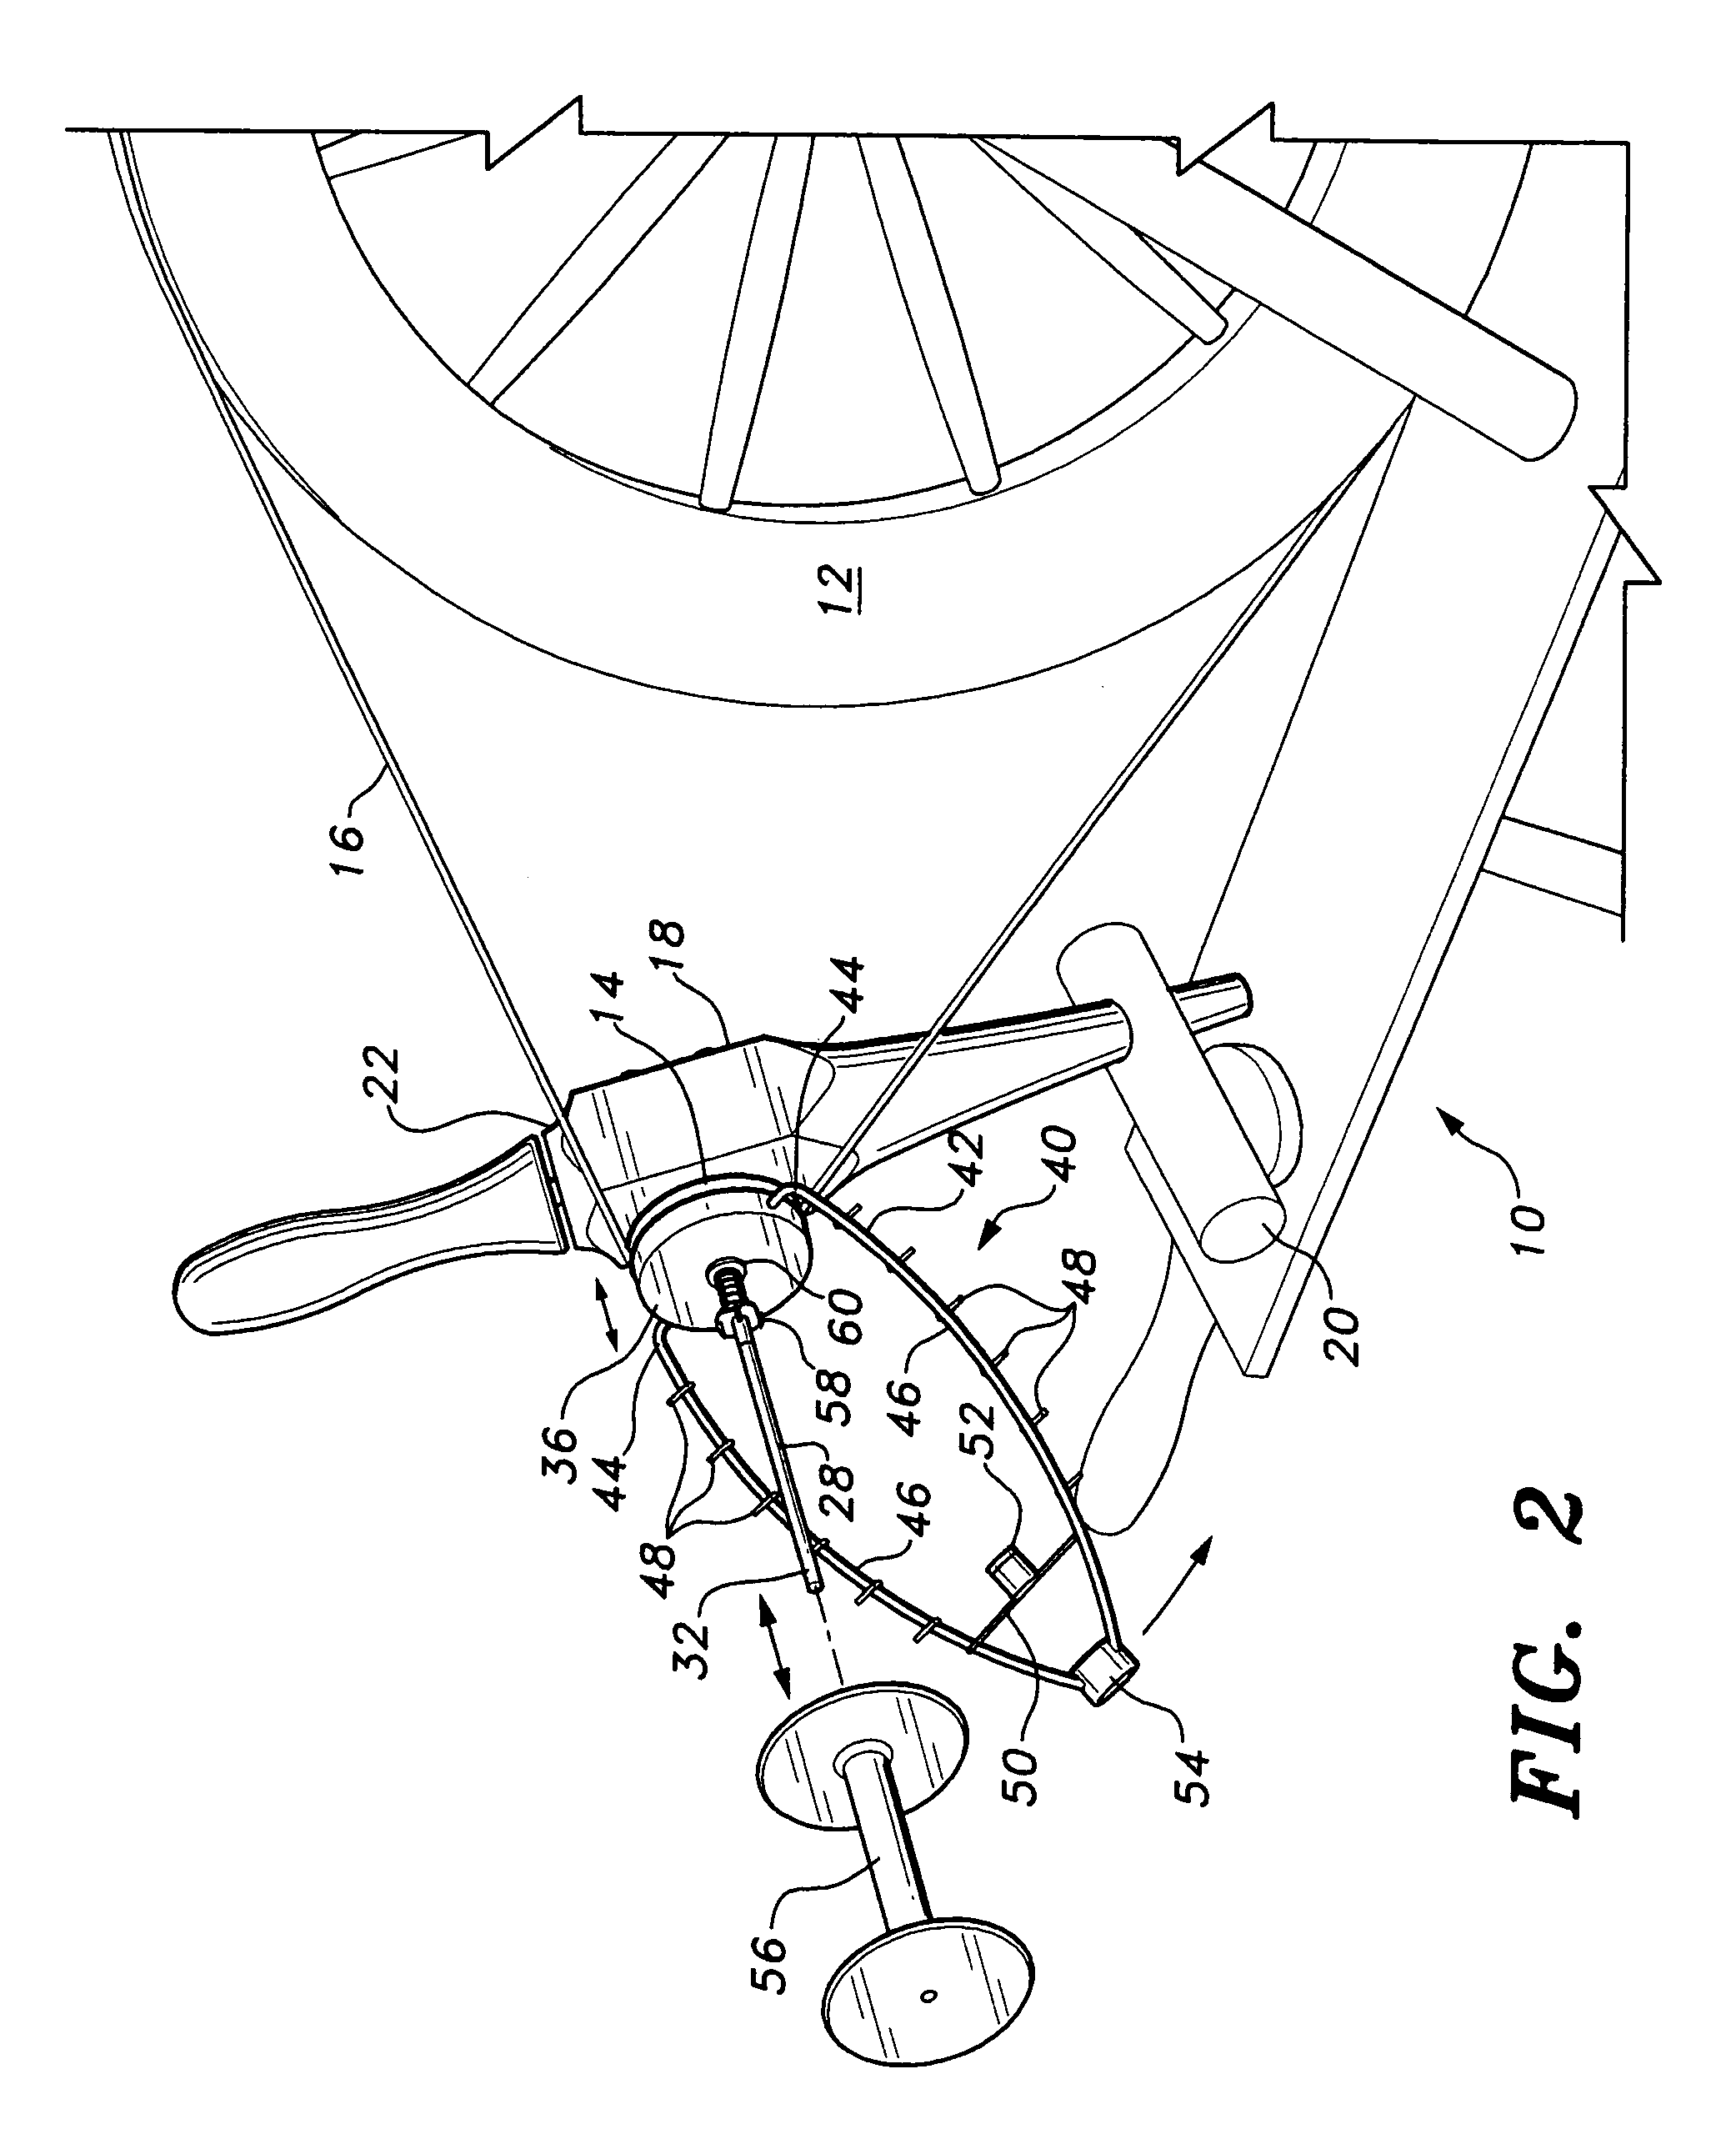 Flyer and spindle brake assembly for handspinning wheels